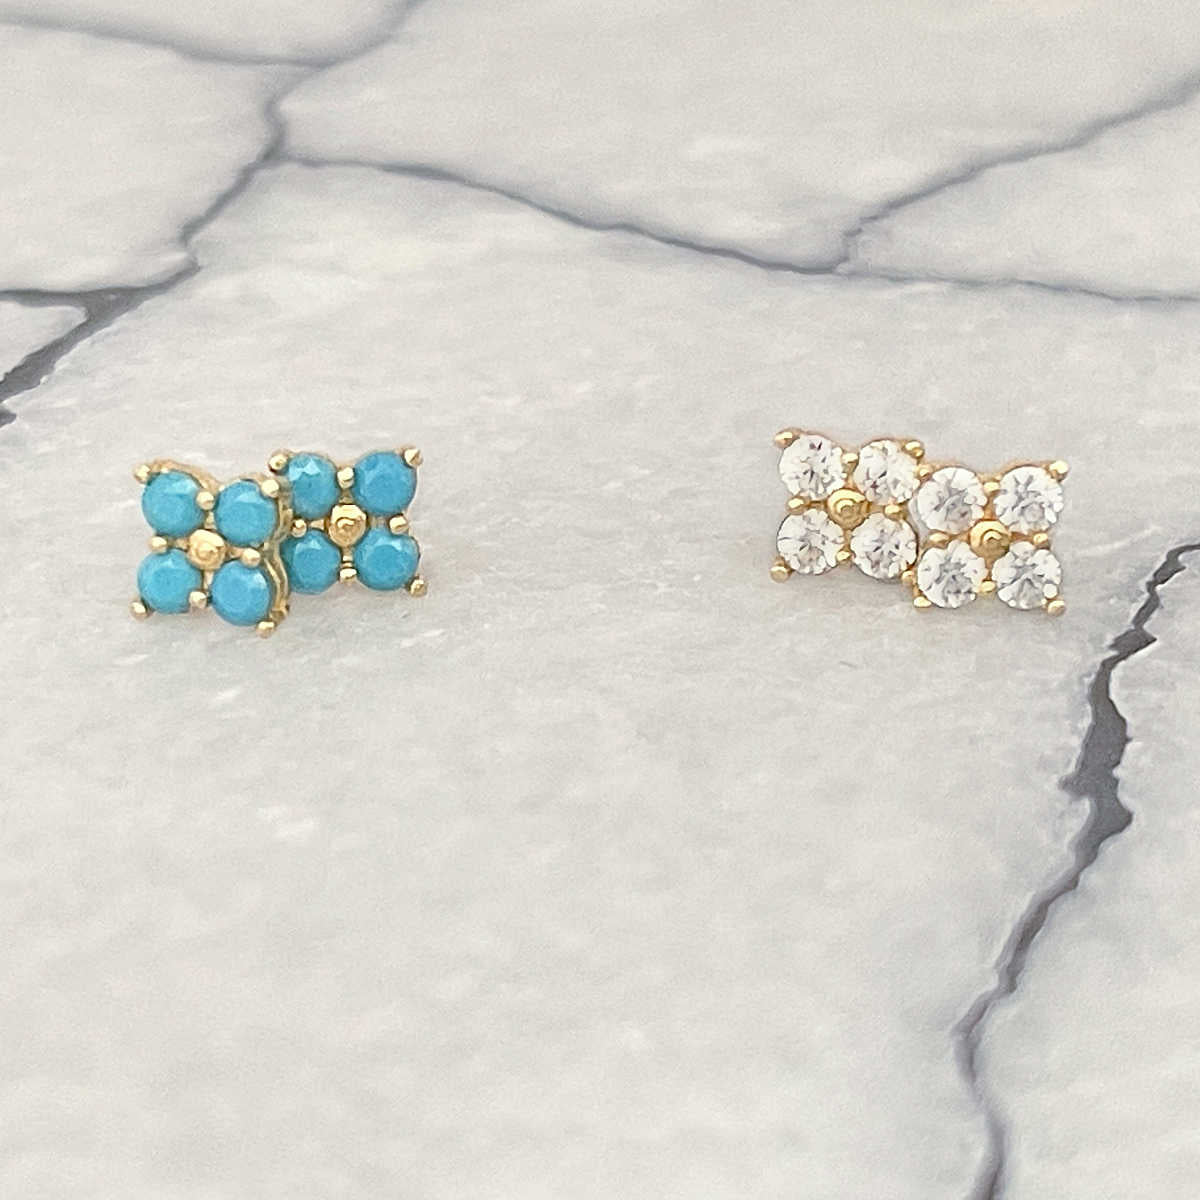 Gemstone Clover Earrings | 14K Gold Studs from Two of Most